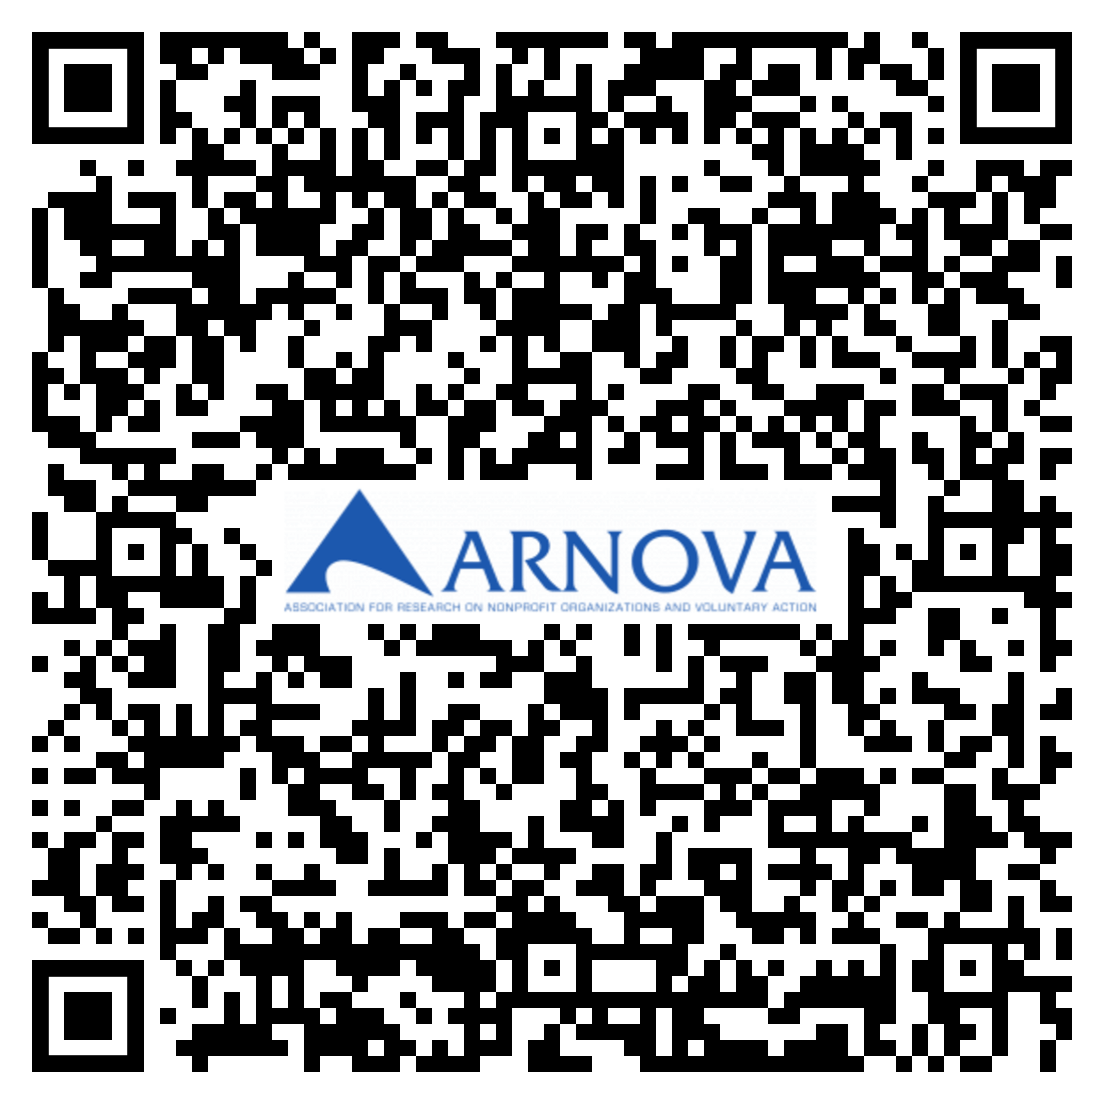 Scan to upload your proof of vaccination or negative COVID test